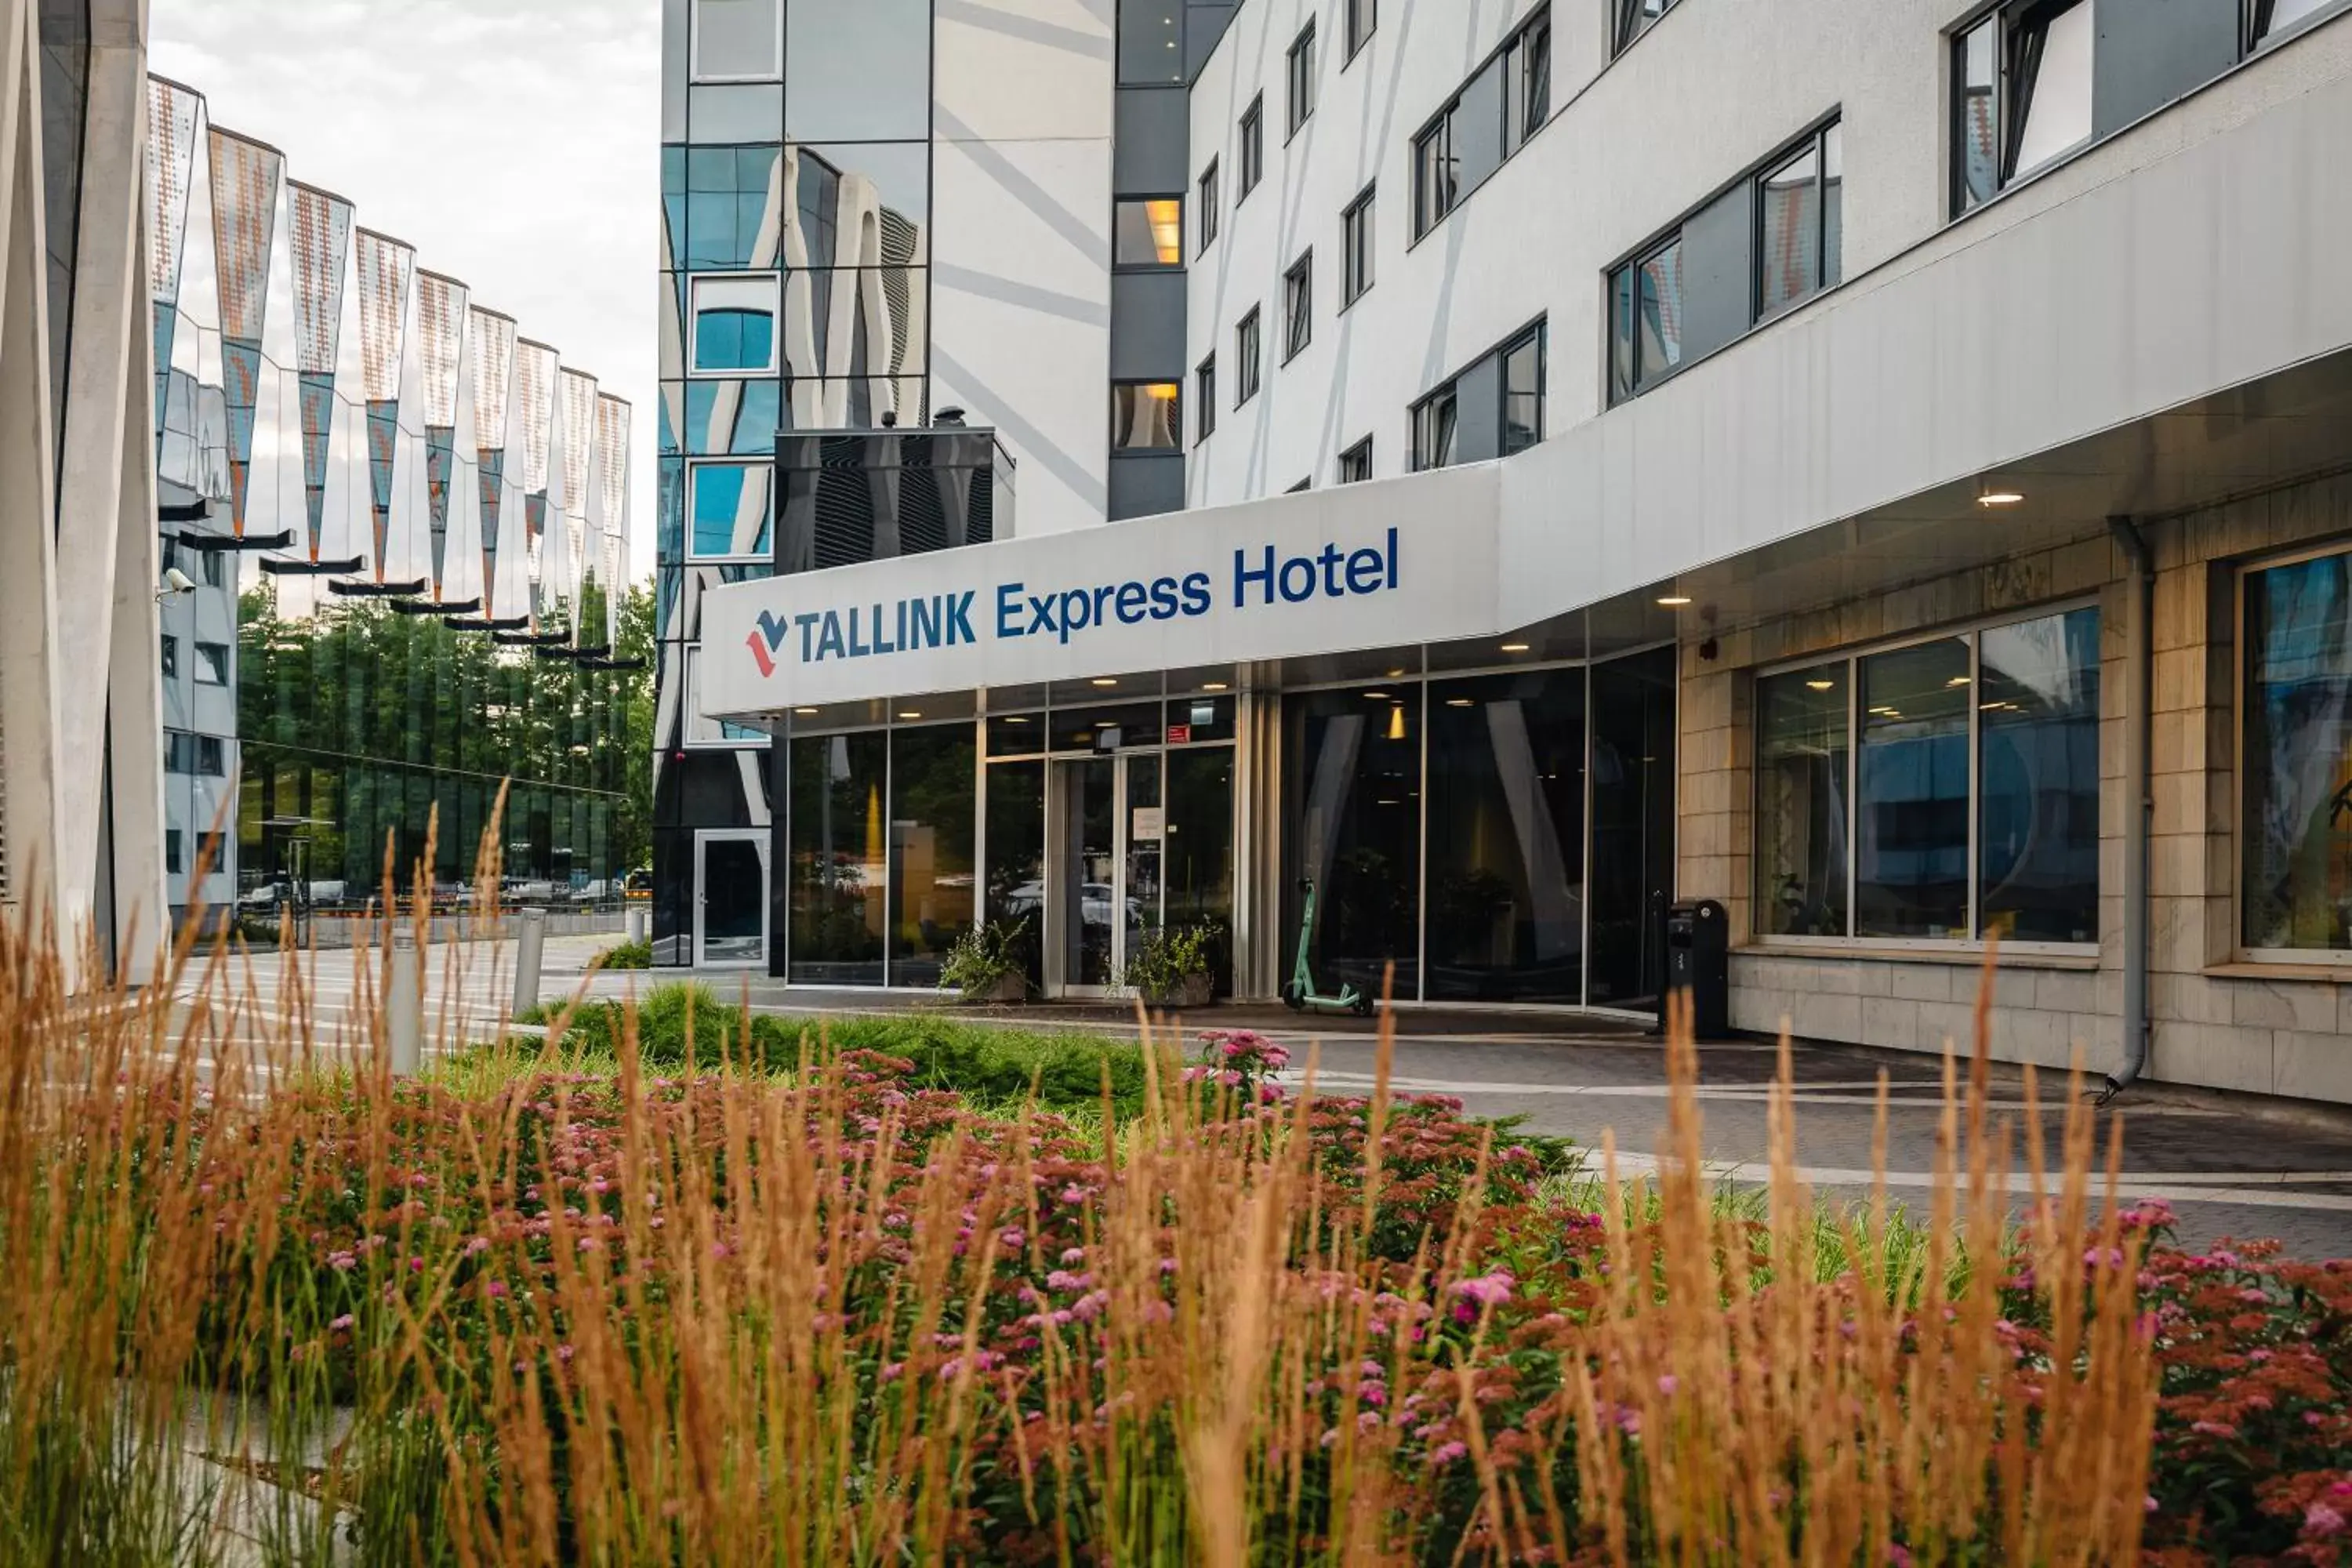 Property building in Tallink Express Hotel